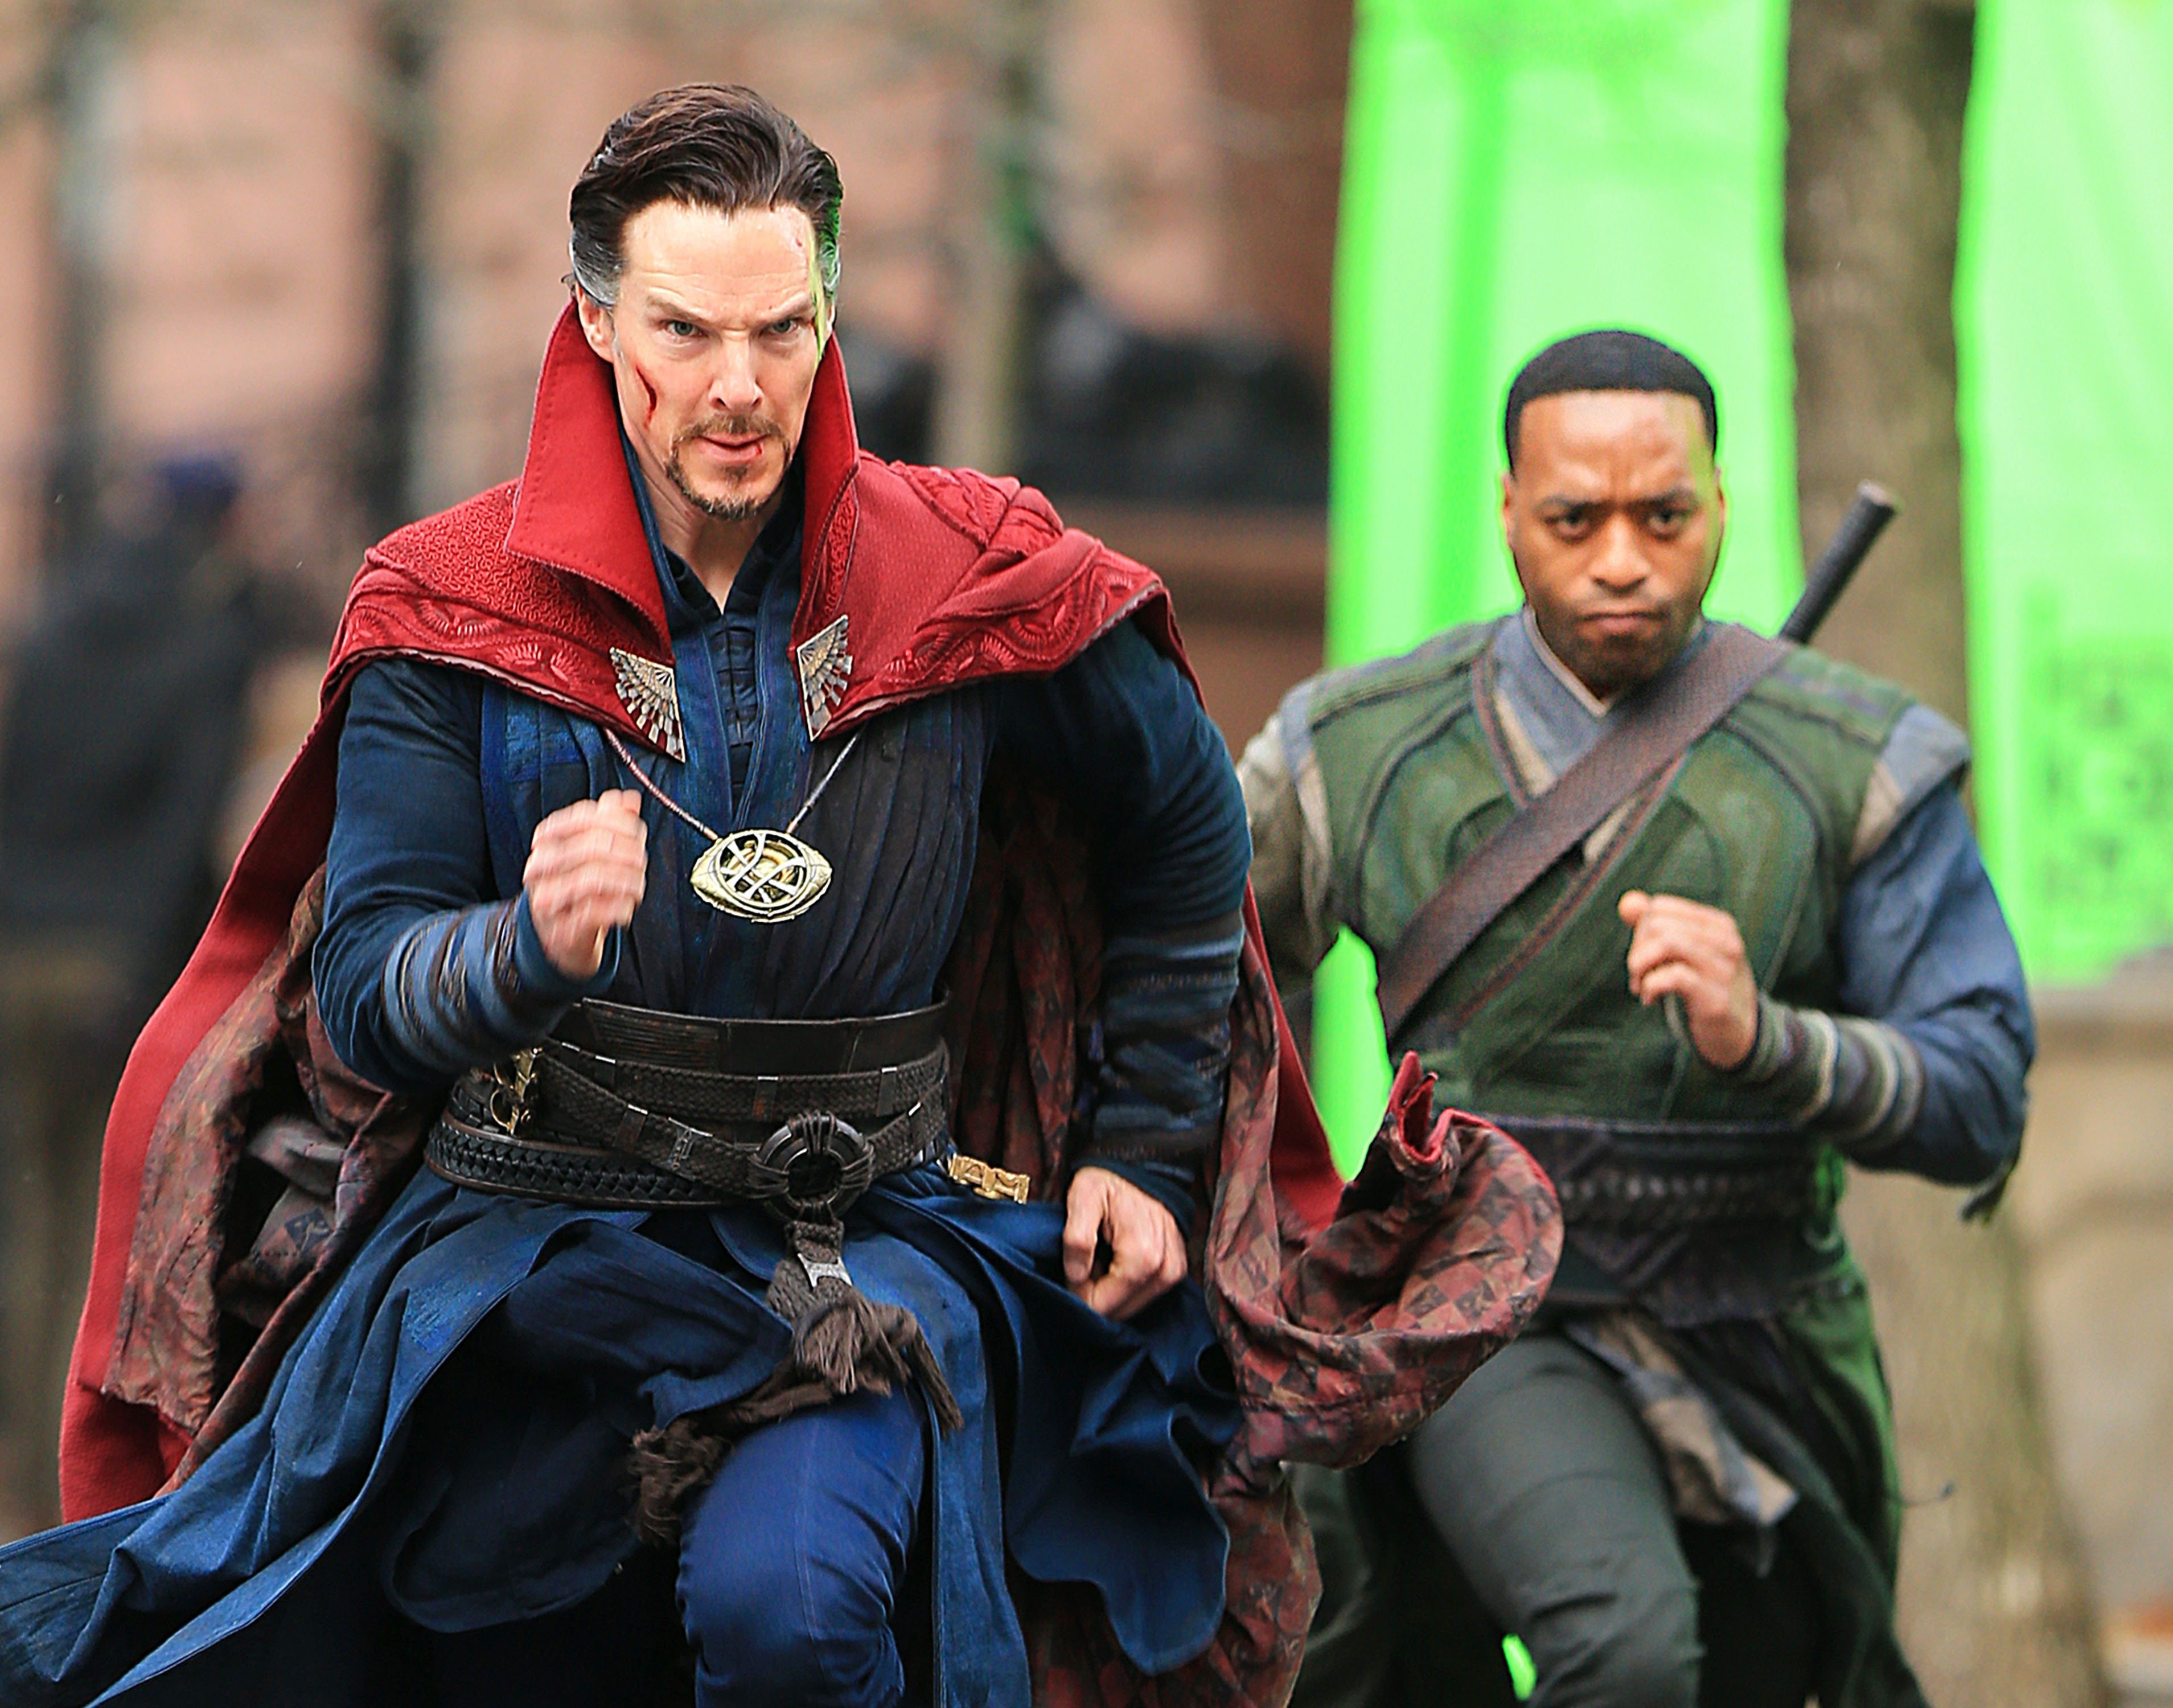 'What If...?' Star Benedict Cumberbatch and Chiwetel Ejiofor dressed in their characters' costumes on the set of 'Doctor Strange.'